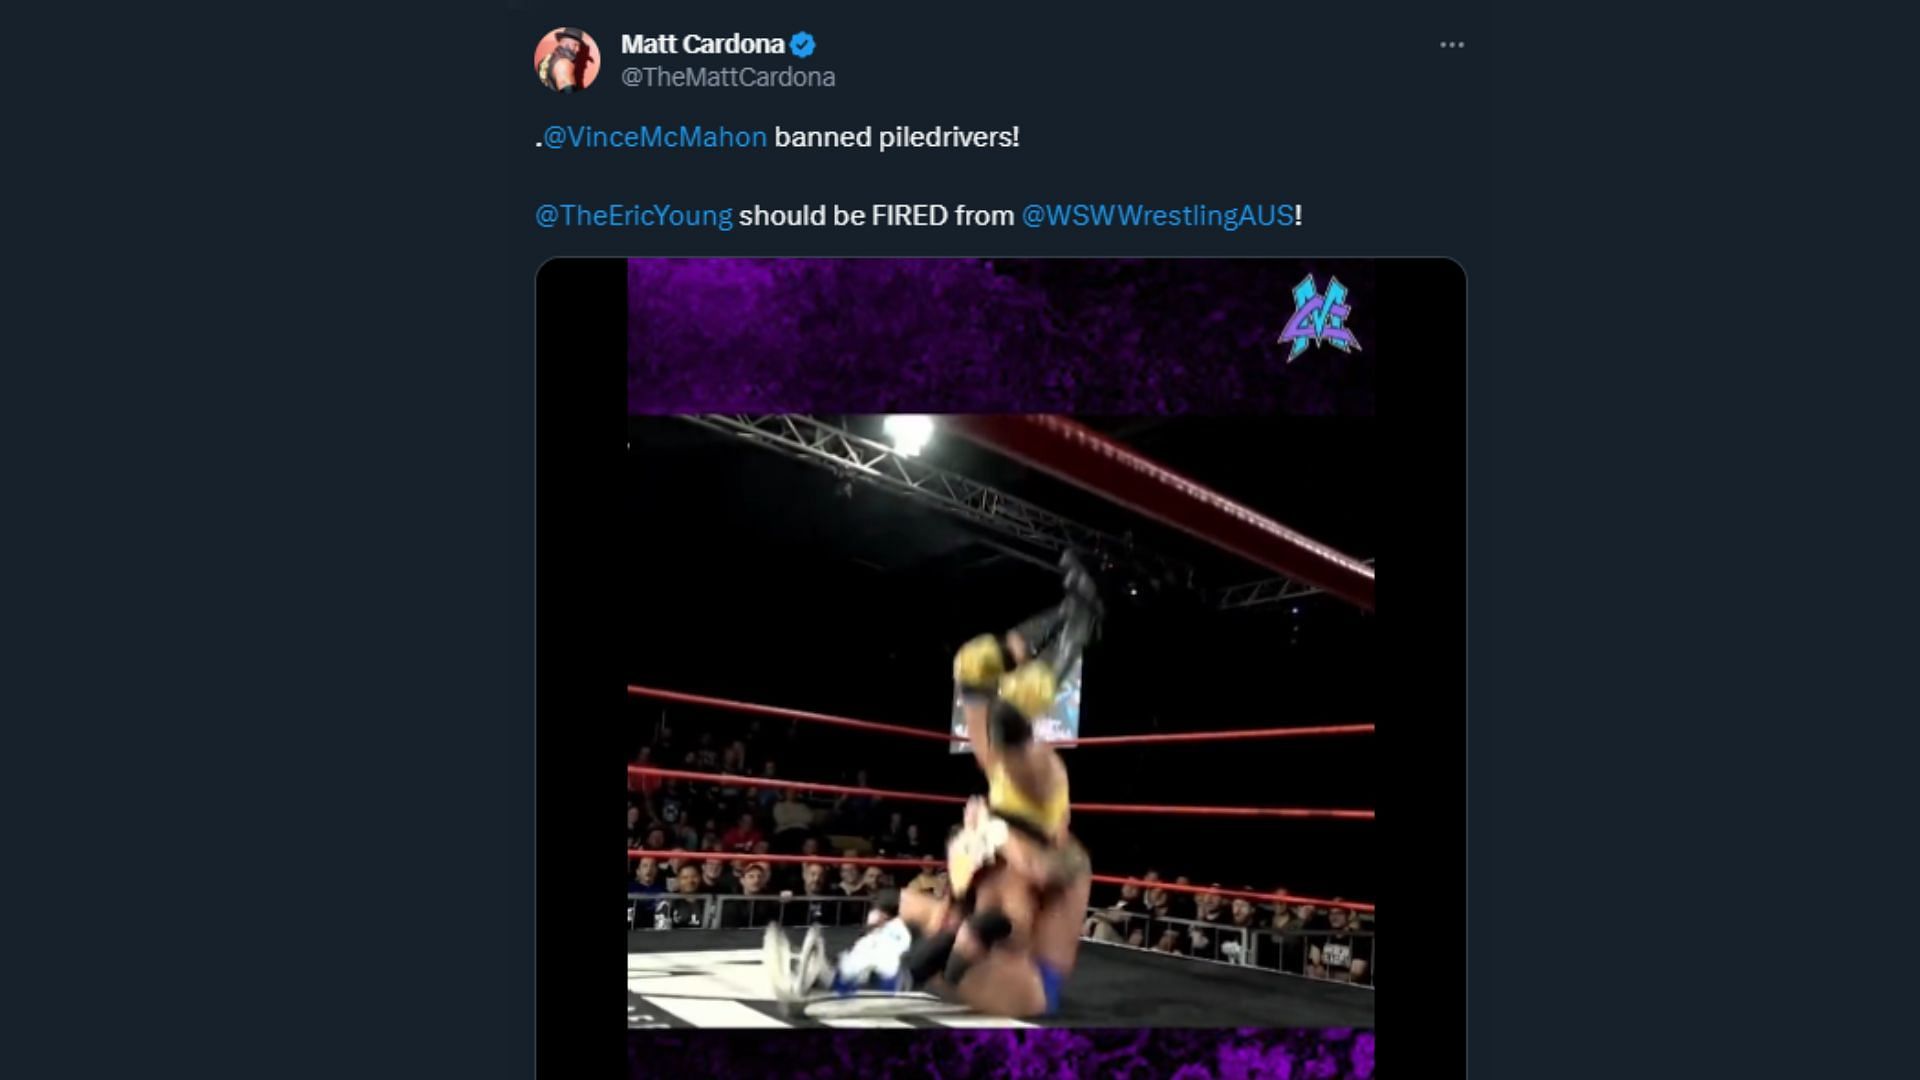 Matt Cardona posted about the piledriver he took from Eric Young